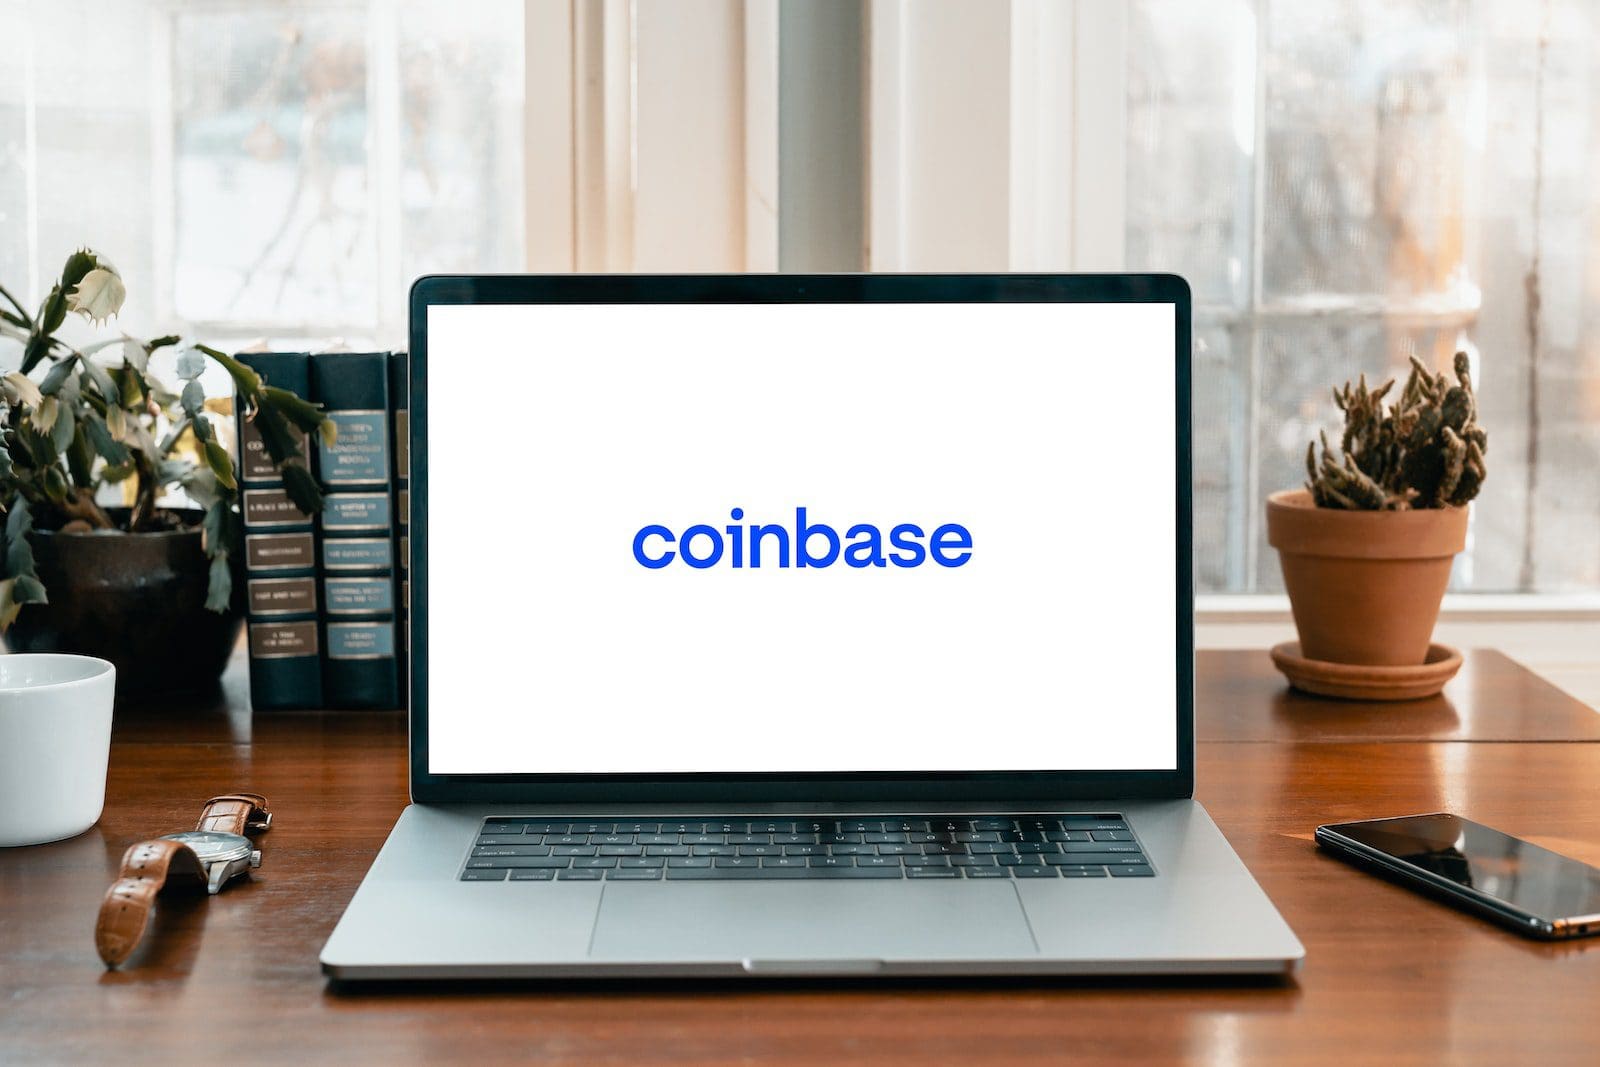 coinbase buying and selling bitcoin